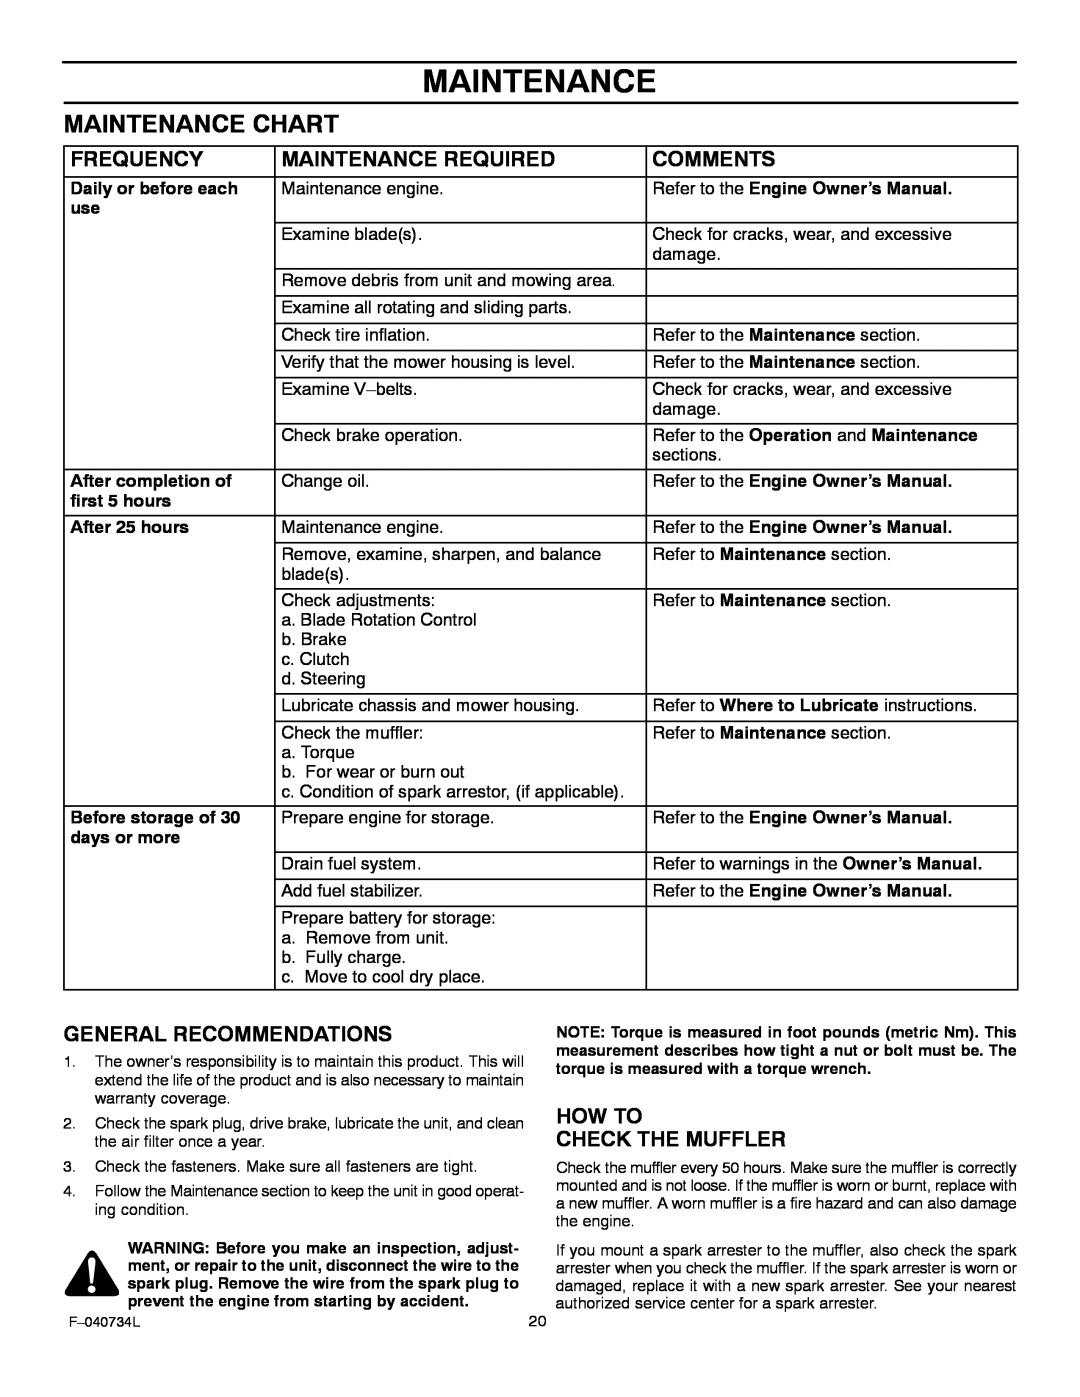 Murray 425015x92A manual Maintenance Chart, Frequency, Maintenance Required, Comments, General Recommendations 